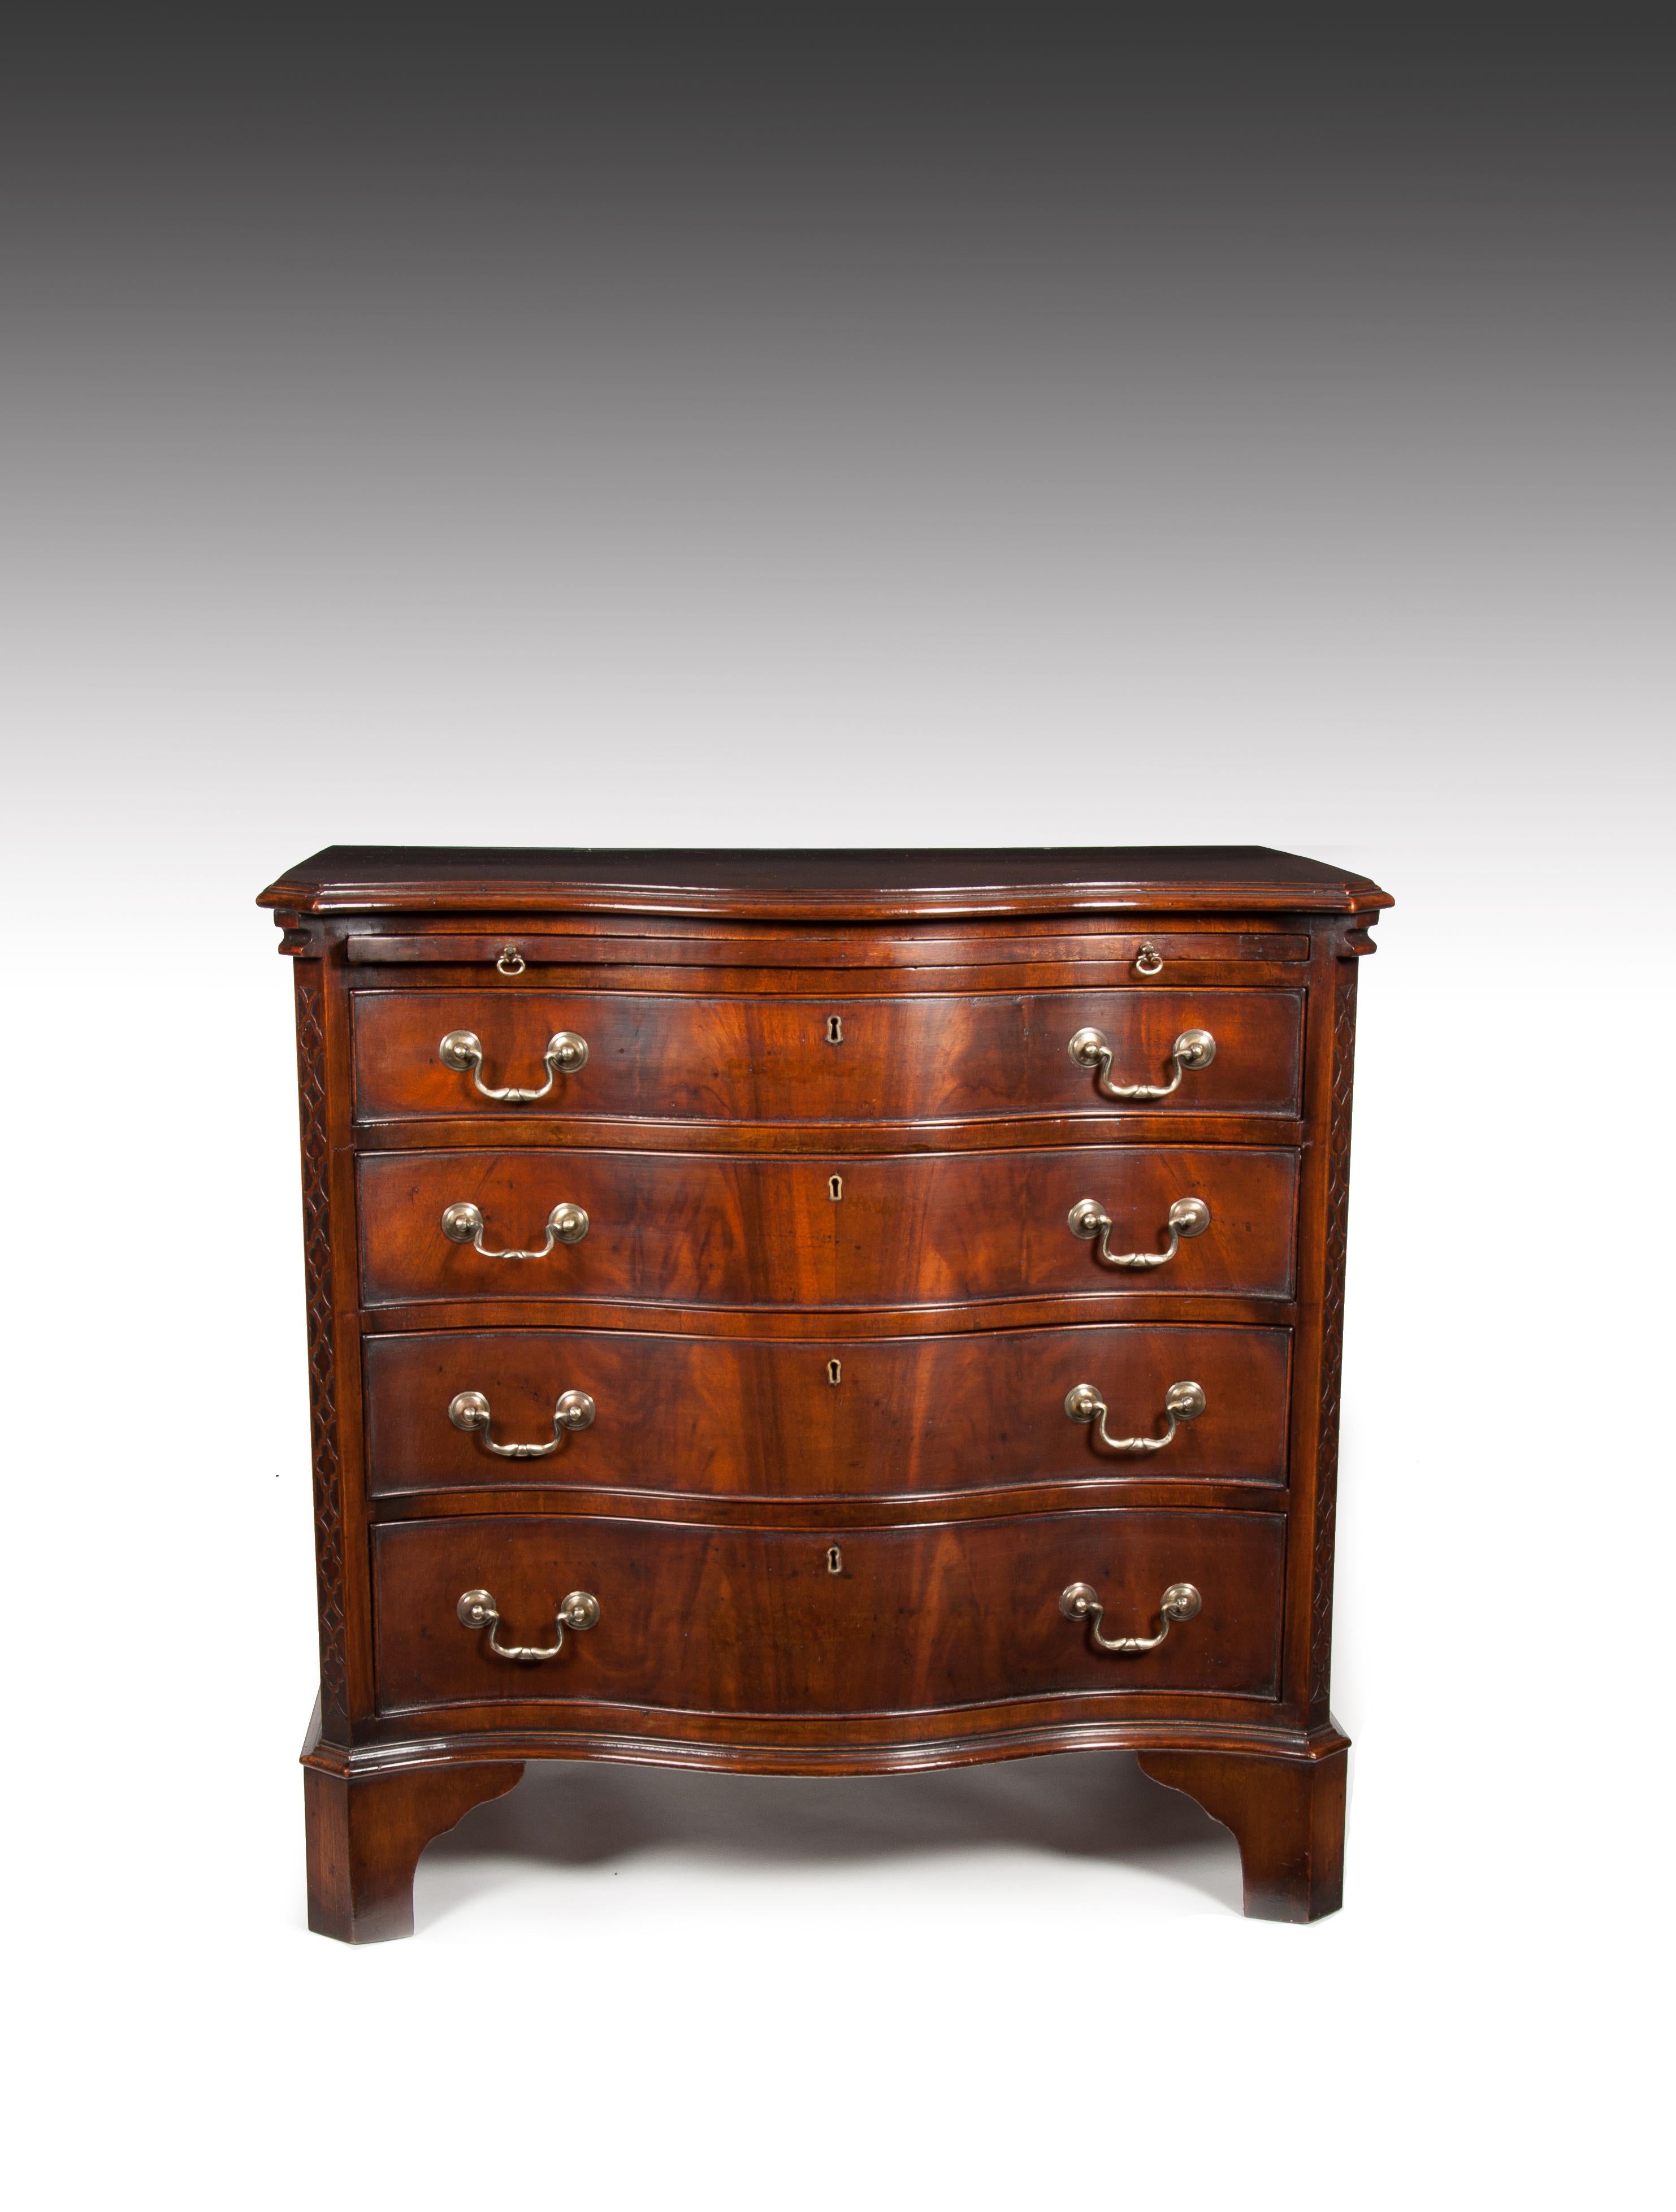 English Antique Serpentine Fronted Mahogany Chest of Drawers